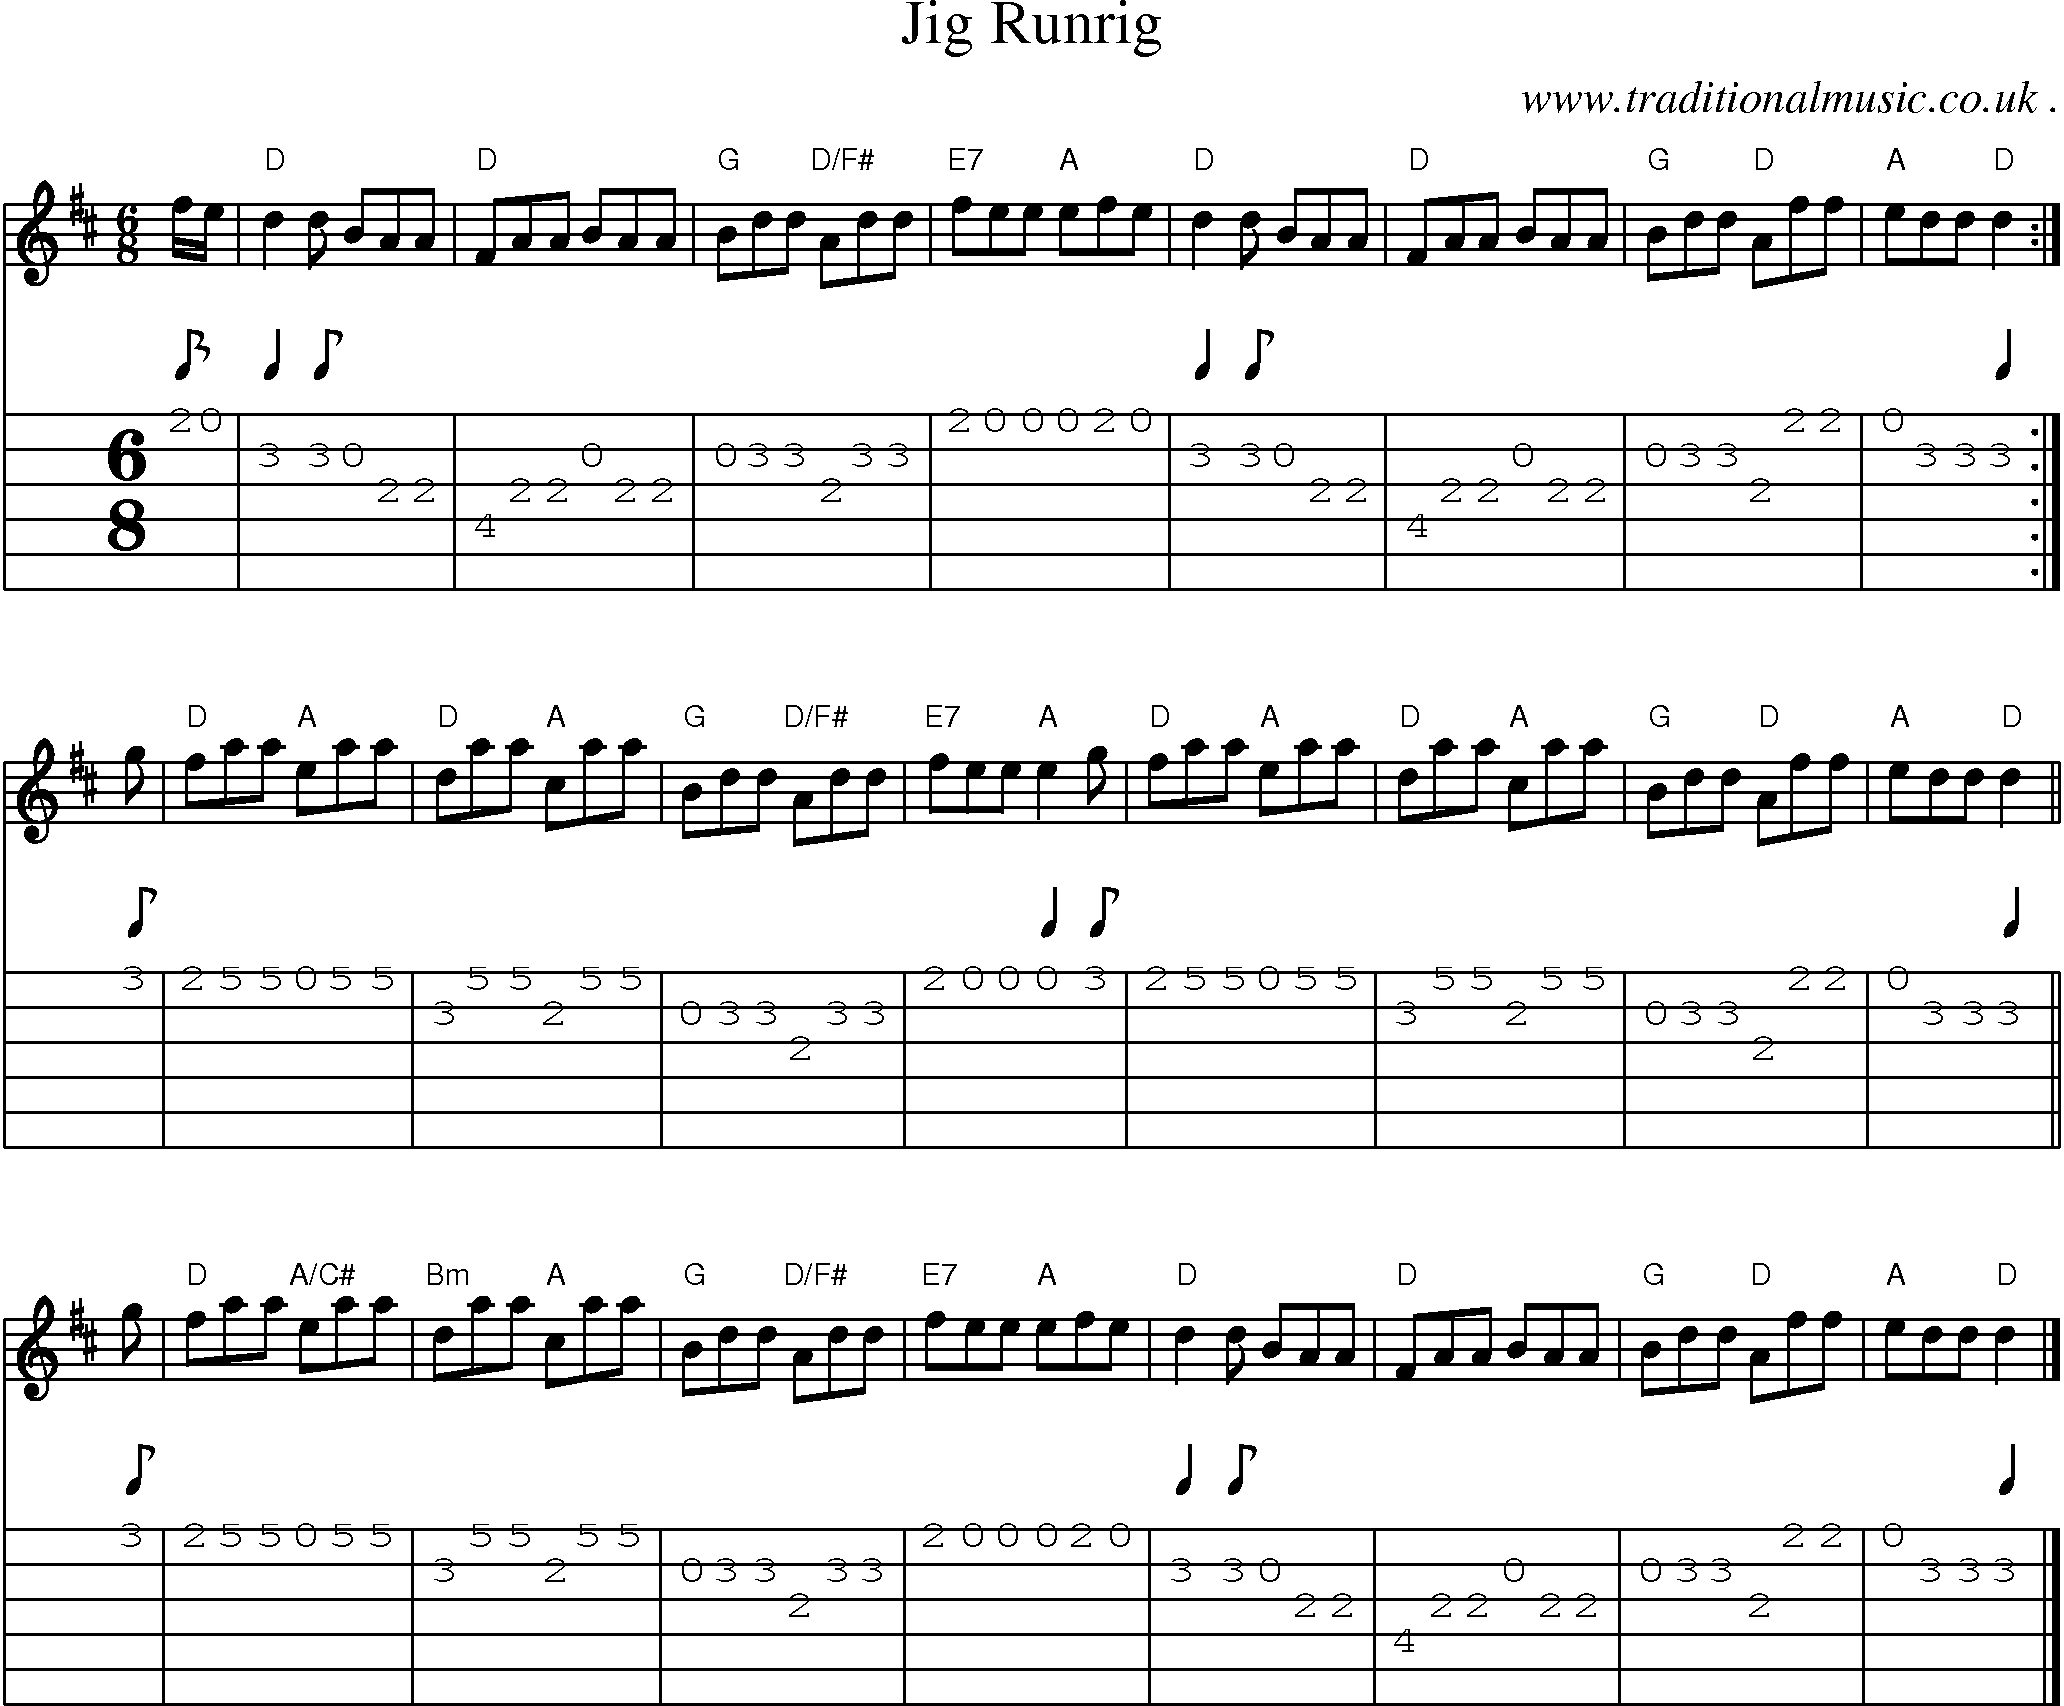 Sheet-music  score, Chords and Guitar Tabs for Jig Runrig